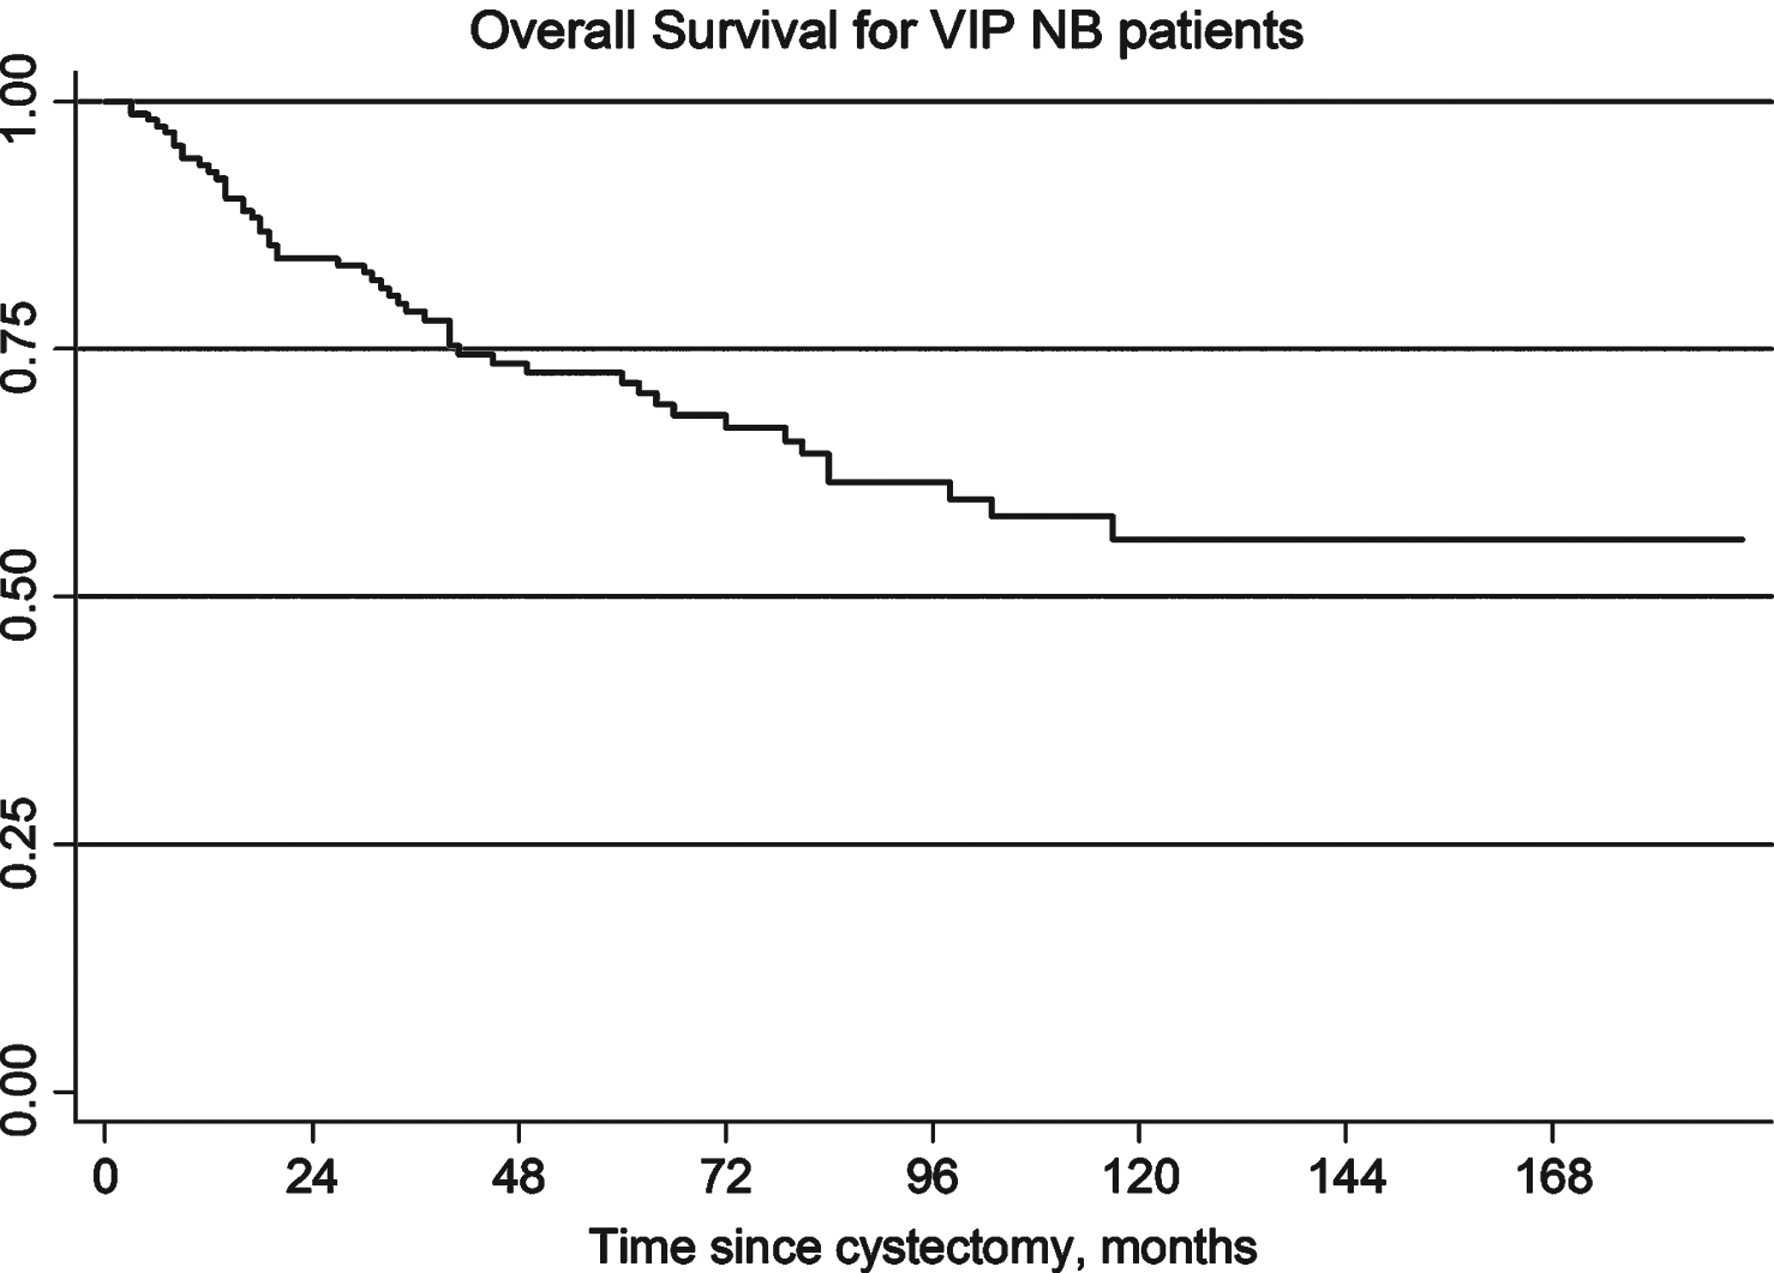 Overall survival for VIP neobladder patients.